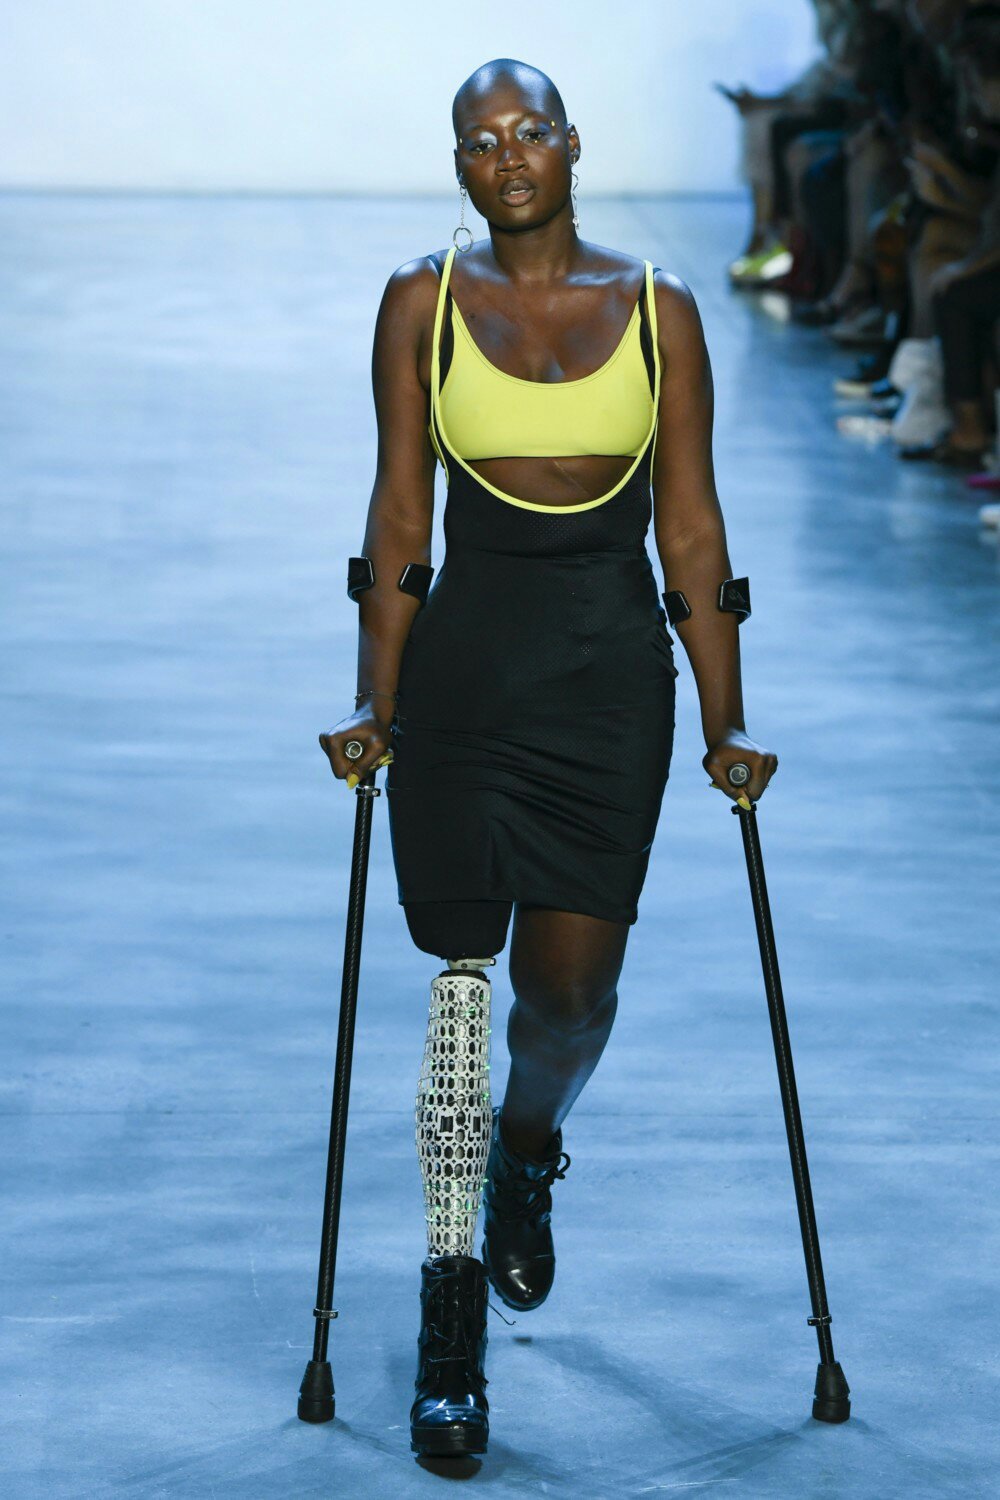 Meet 28-Year Old Amputee Model With One Leg Who Walked The Runway